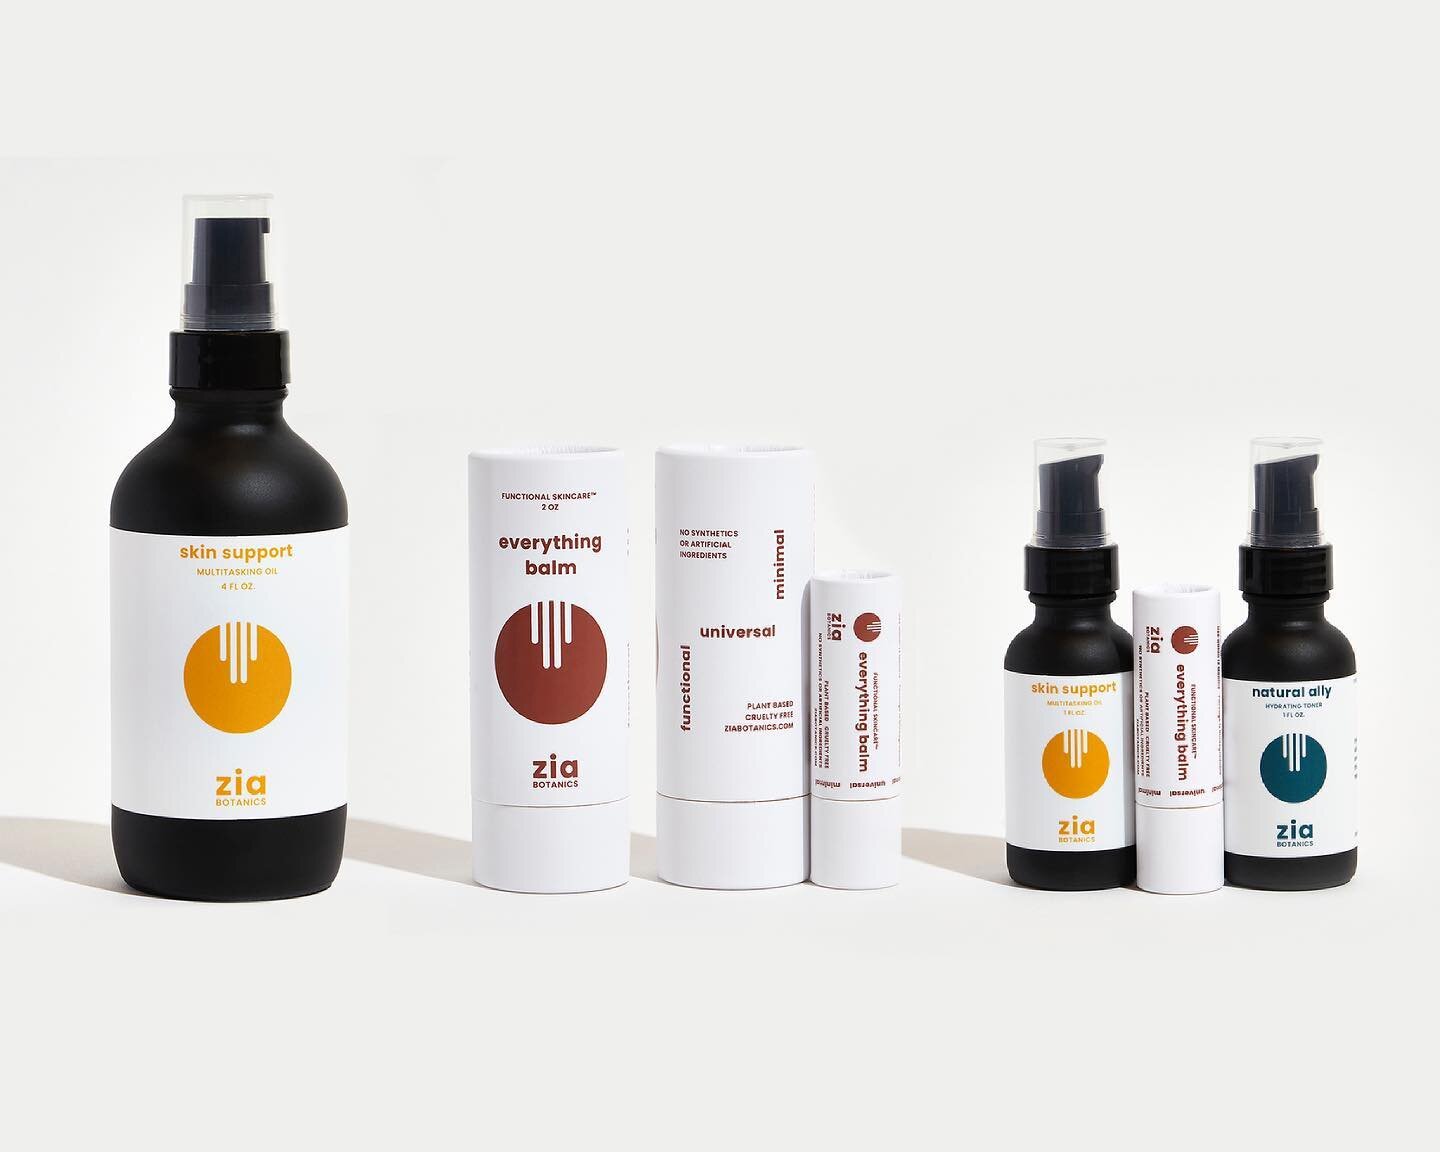 Package and label design for @ziabotanics - beautiful, clean and simple just like their products! We used their Brand Guide as the baseline and we love how they offerings translated into product packaging 💫 How does your packaging design communicate